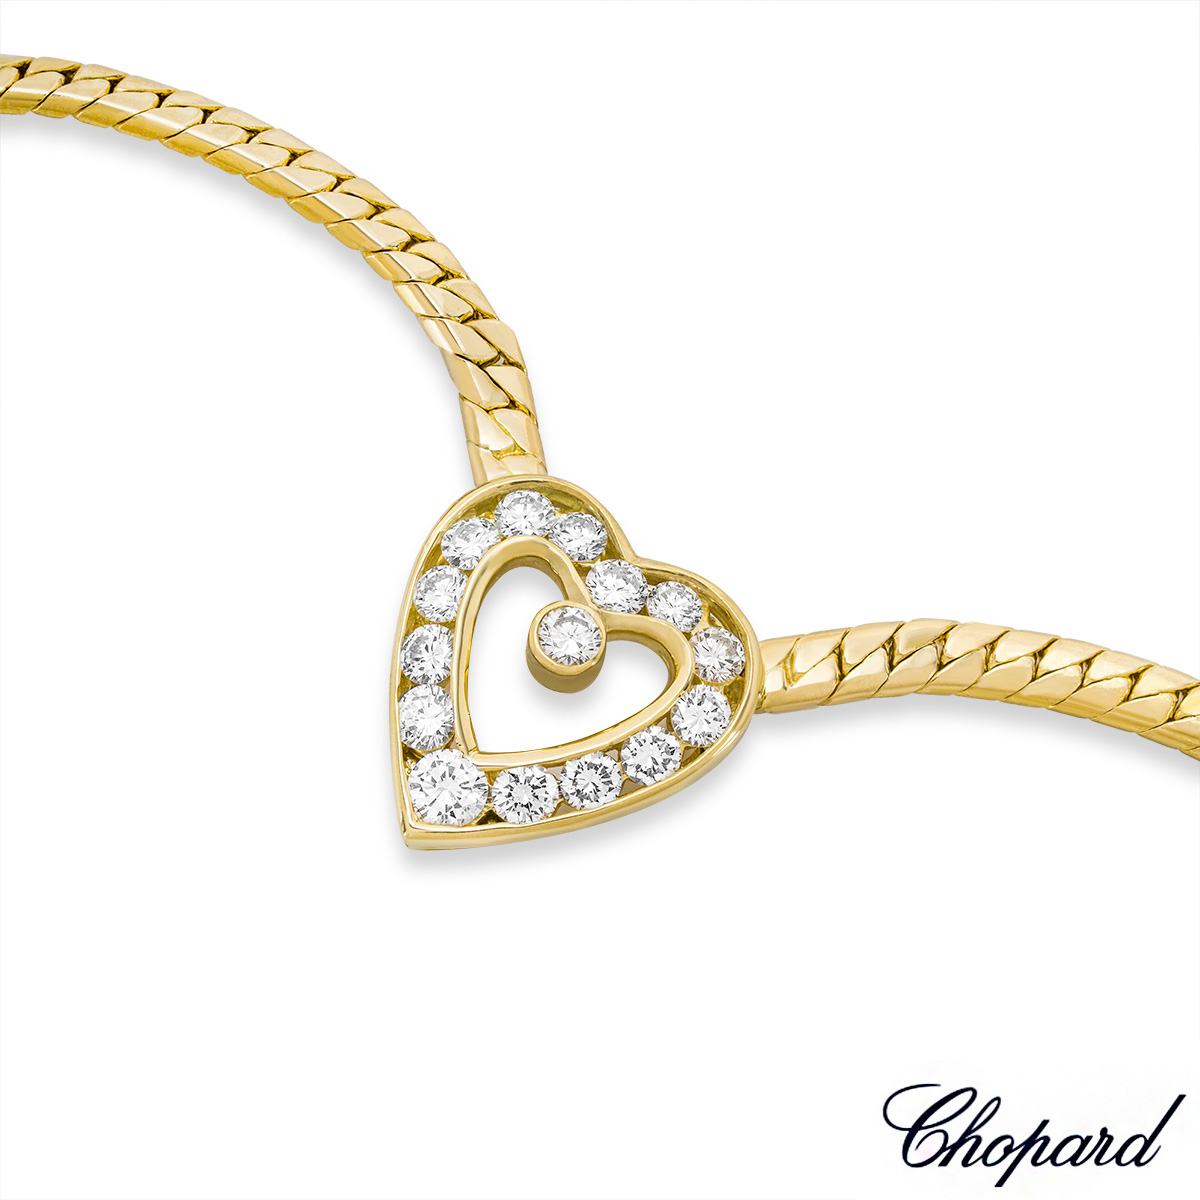 Chopard Yellow Gold Diamond Heart Necklace 0.94ct TDW